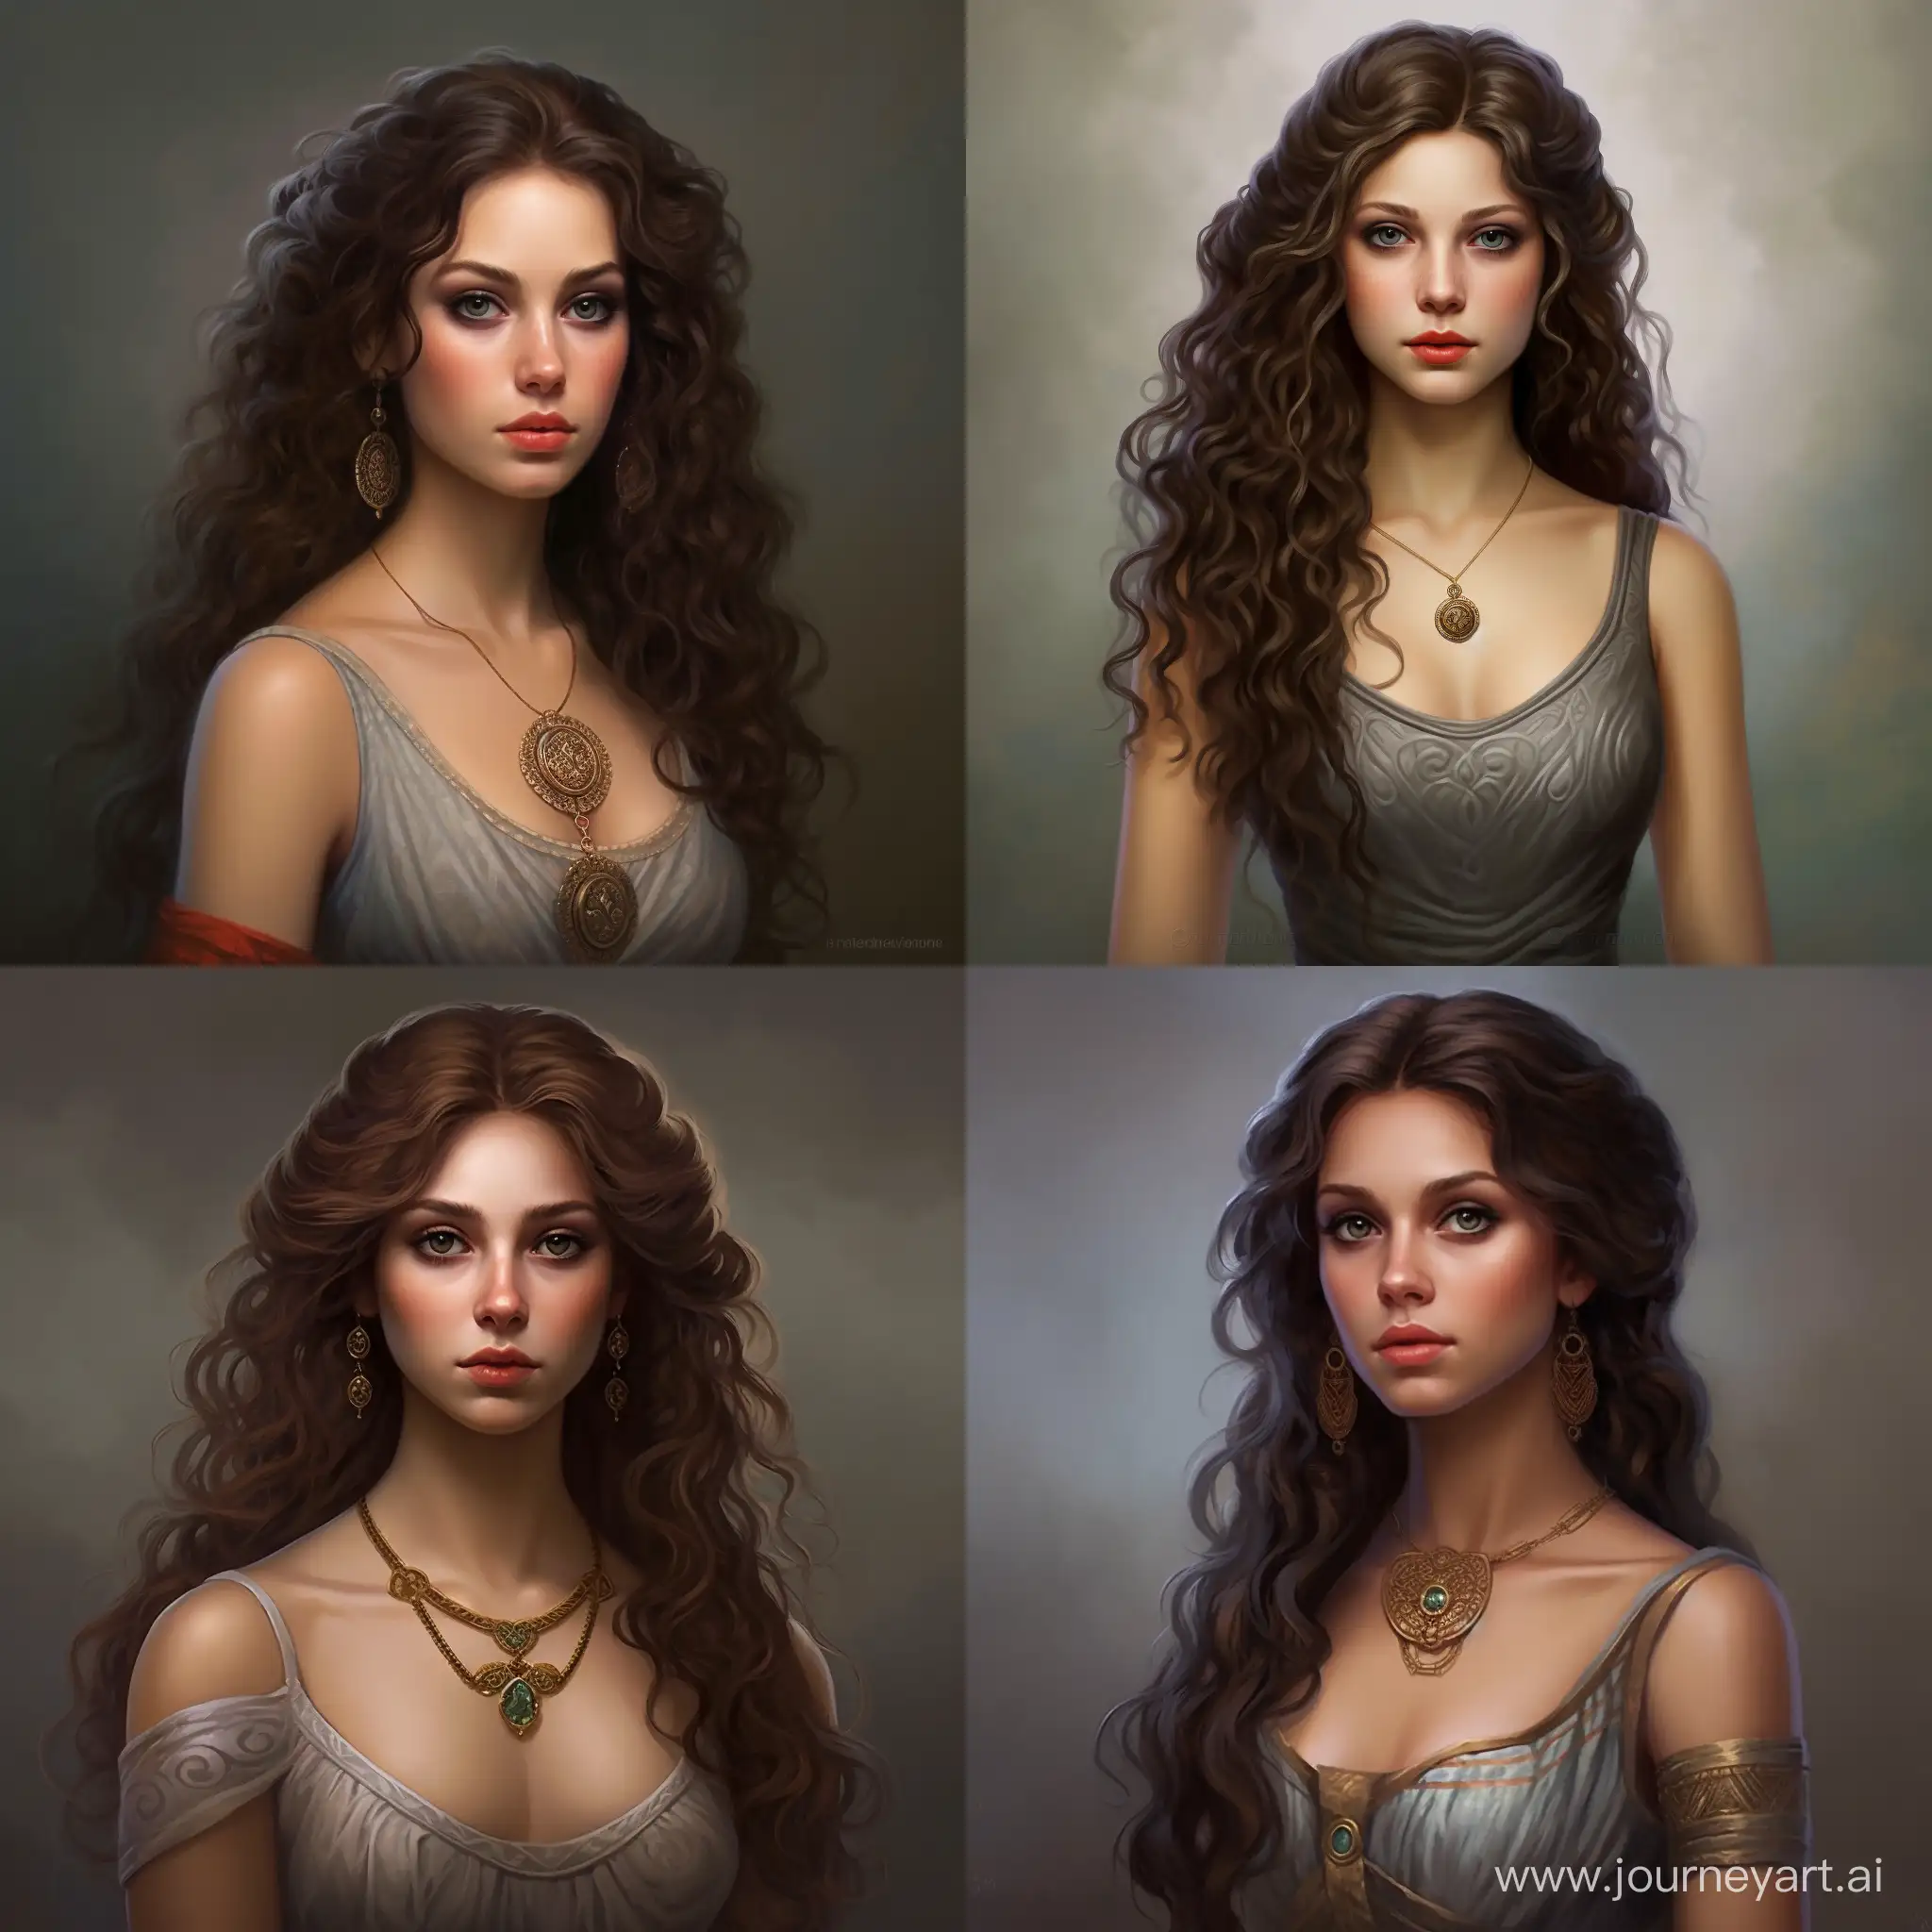 Beautiful ancient greek
woman in her 20s photorealistic portrait

